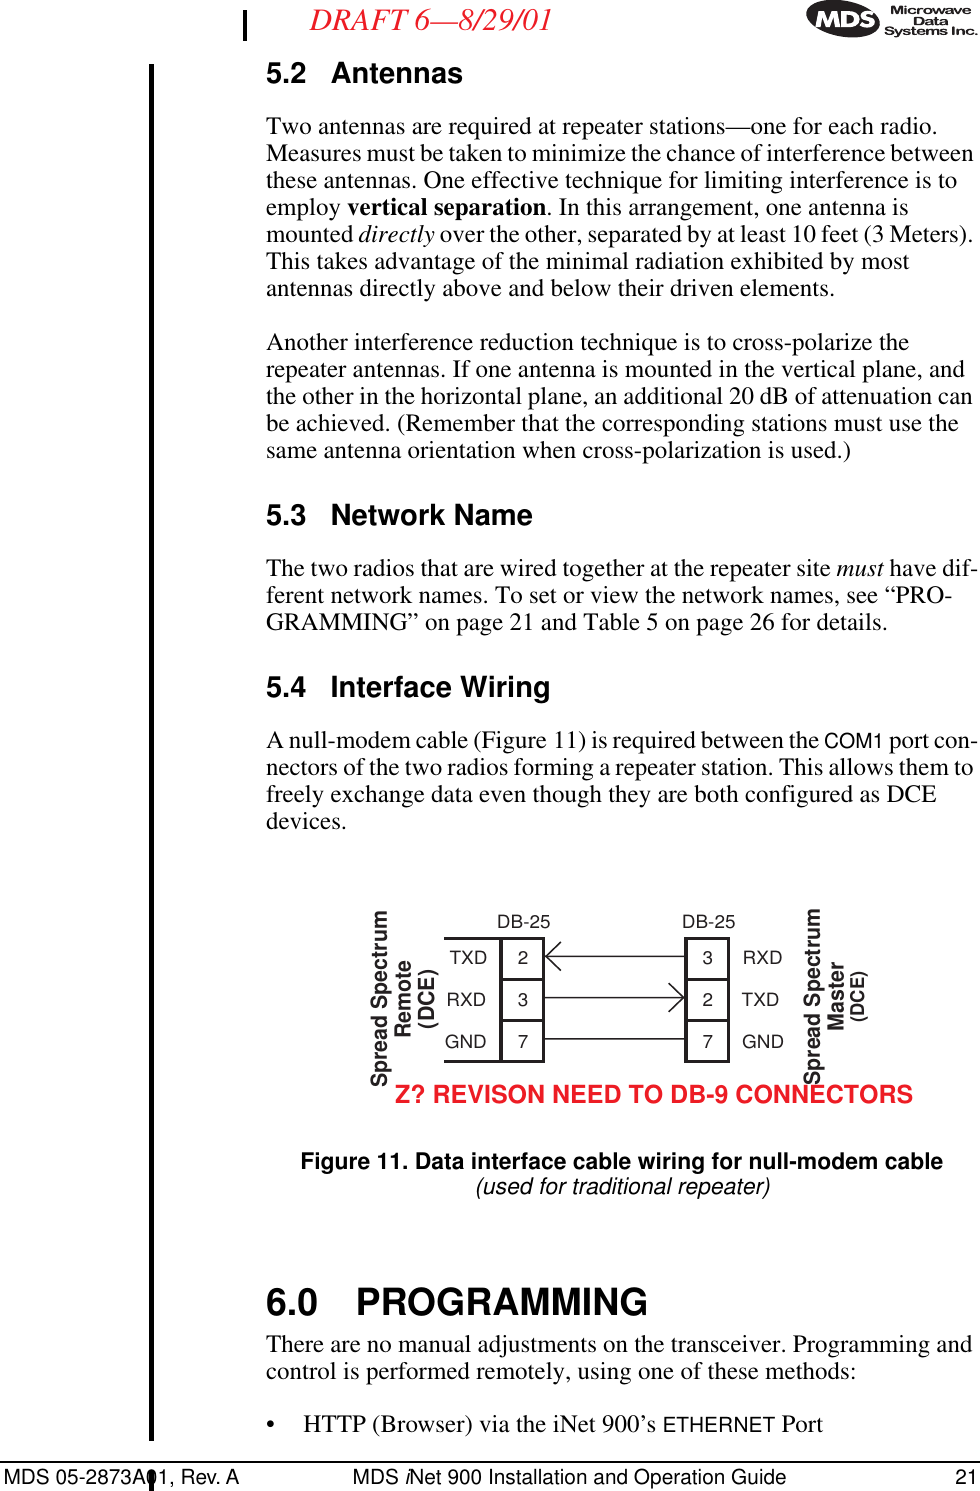 MDS 05-2873A01, Rev. A MDS iNet 900 Installation and Operation Guide 21DRAFT 6—8/29/015.2 AntennasTwo antennas are required at repeater stations—one for each radio. Measures must be taken to minimize the chance of interference between these antennas. One effective technique for limiting interference is to employ vertical separation. In this arrangement, one antenna is mounted directly over the other, separated by at least 10 feet (3 Meters). This takes advantage of the minimal radiation exhibited by most antennas directly above and below their driven elements.Another interference reduction technique is to cross-polarize the repeater antennas. If one antenna is mounted in the vertical plane, and the other in the horizontal plane, an additional 20 dB of attenuation can be achieved. (Remember that the corresponding stations must use the same antenna orientation when cross-polarization is used.)5.3 Network NameThe two radios that are wired together at the repeater site must have dif-ferent network names. To set or view the network names, see “PRO-GRAMMING” on page 21 and Table 5 on page 26 for details.5.4 Interface WiringA null-modem cable (Figure 11) is required between the COM1 port con-nectors of the two radios forming a repeater station. This allows them to freely exchange data even though they are both configured as DCE devices.Invisible place holderFigure 11. Data interface cable wiring for null-modem cable(used for traditional repeater)6.0 PROGRAMMING There are no manual adjustments on the transceiver. Programming and control is performed remotely, using one of these methods:• HTTP (Browser) via the iNet 900’s ETHERNET PortDB-25 DB-25Spread Spectrum Master(DCE)237327Spread Spectrum Remote(DCE)TXDRXDGNDRXDTXDGNDZ? REVISON NEED TO DB-9 CONNECTORS